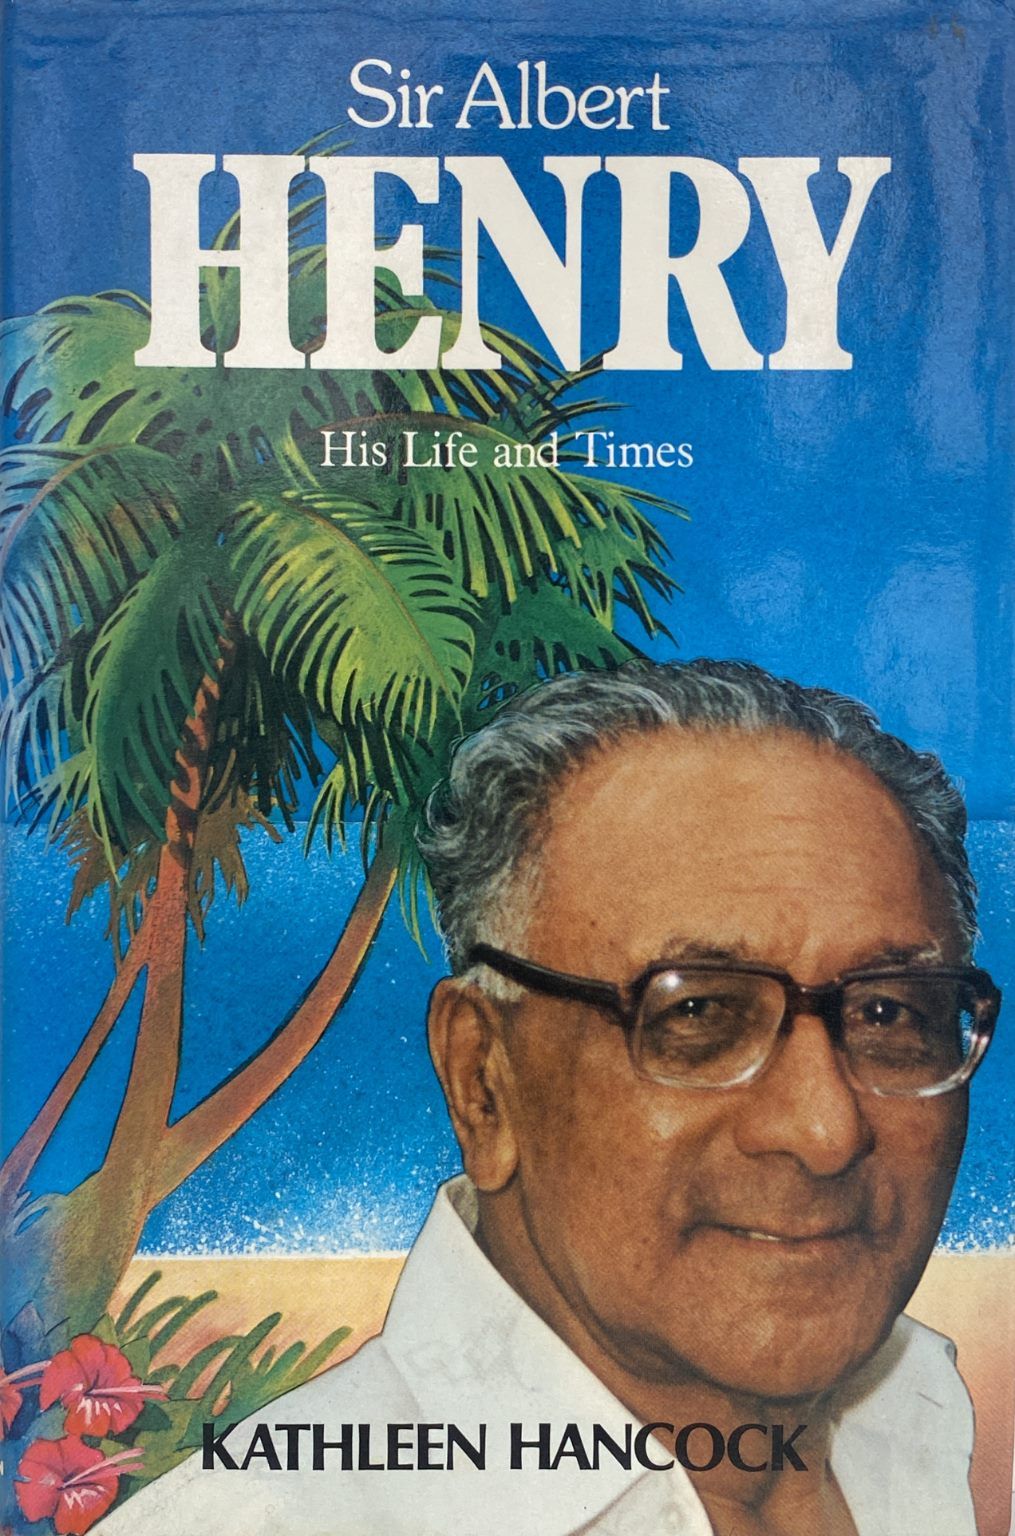 SIR ALBERT HENRY: His Life and Times